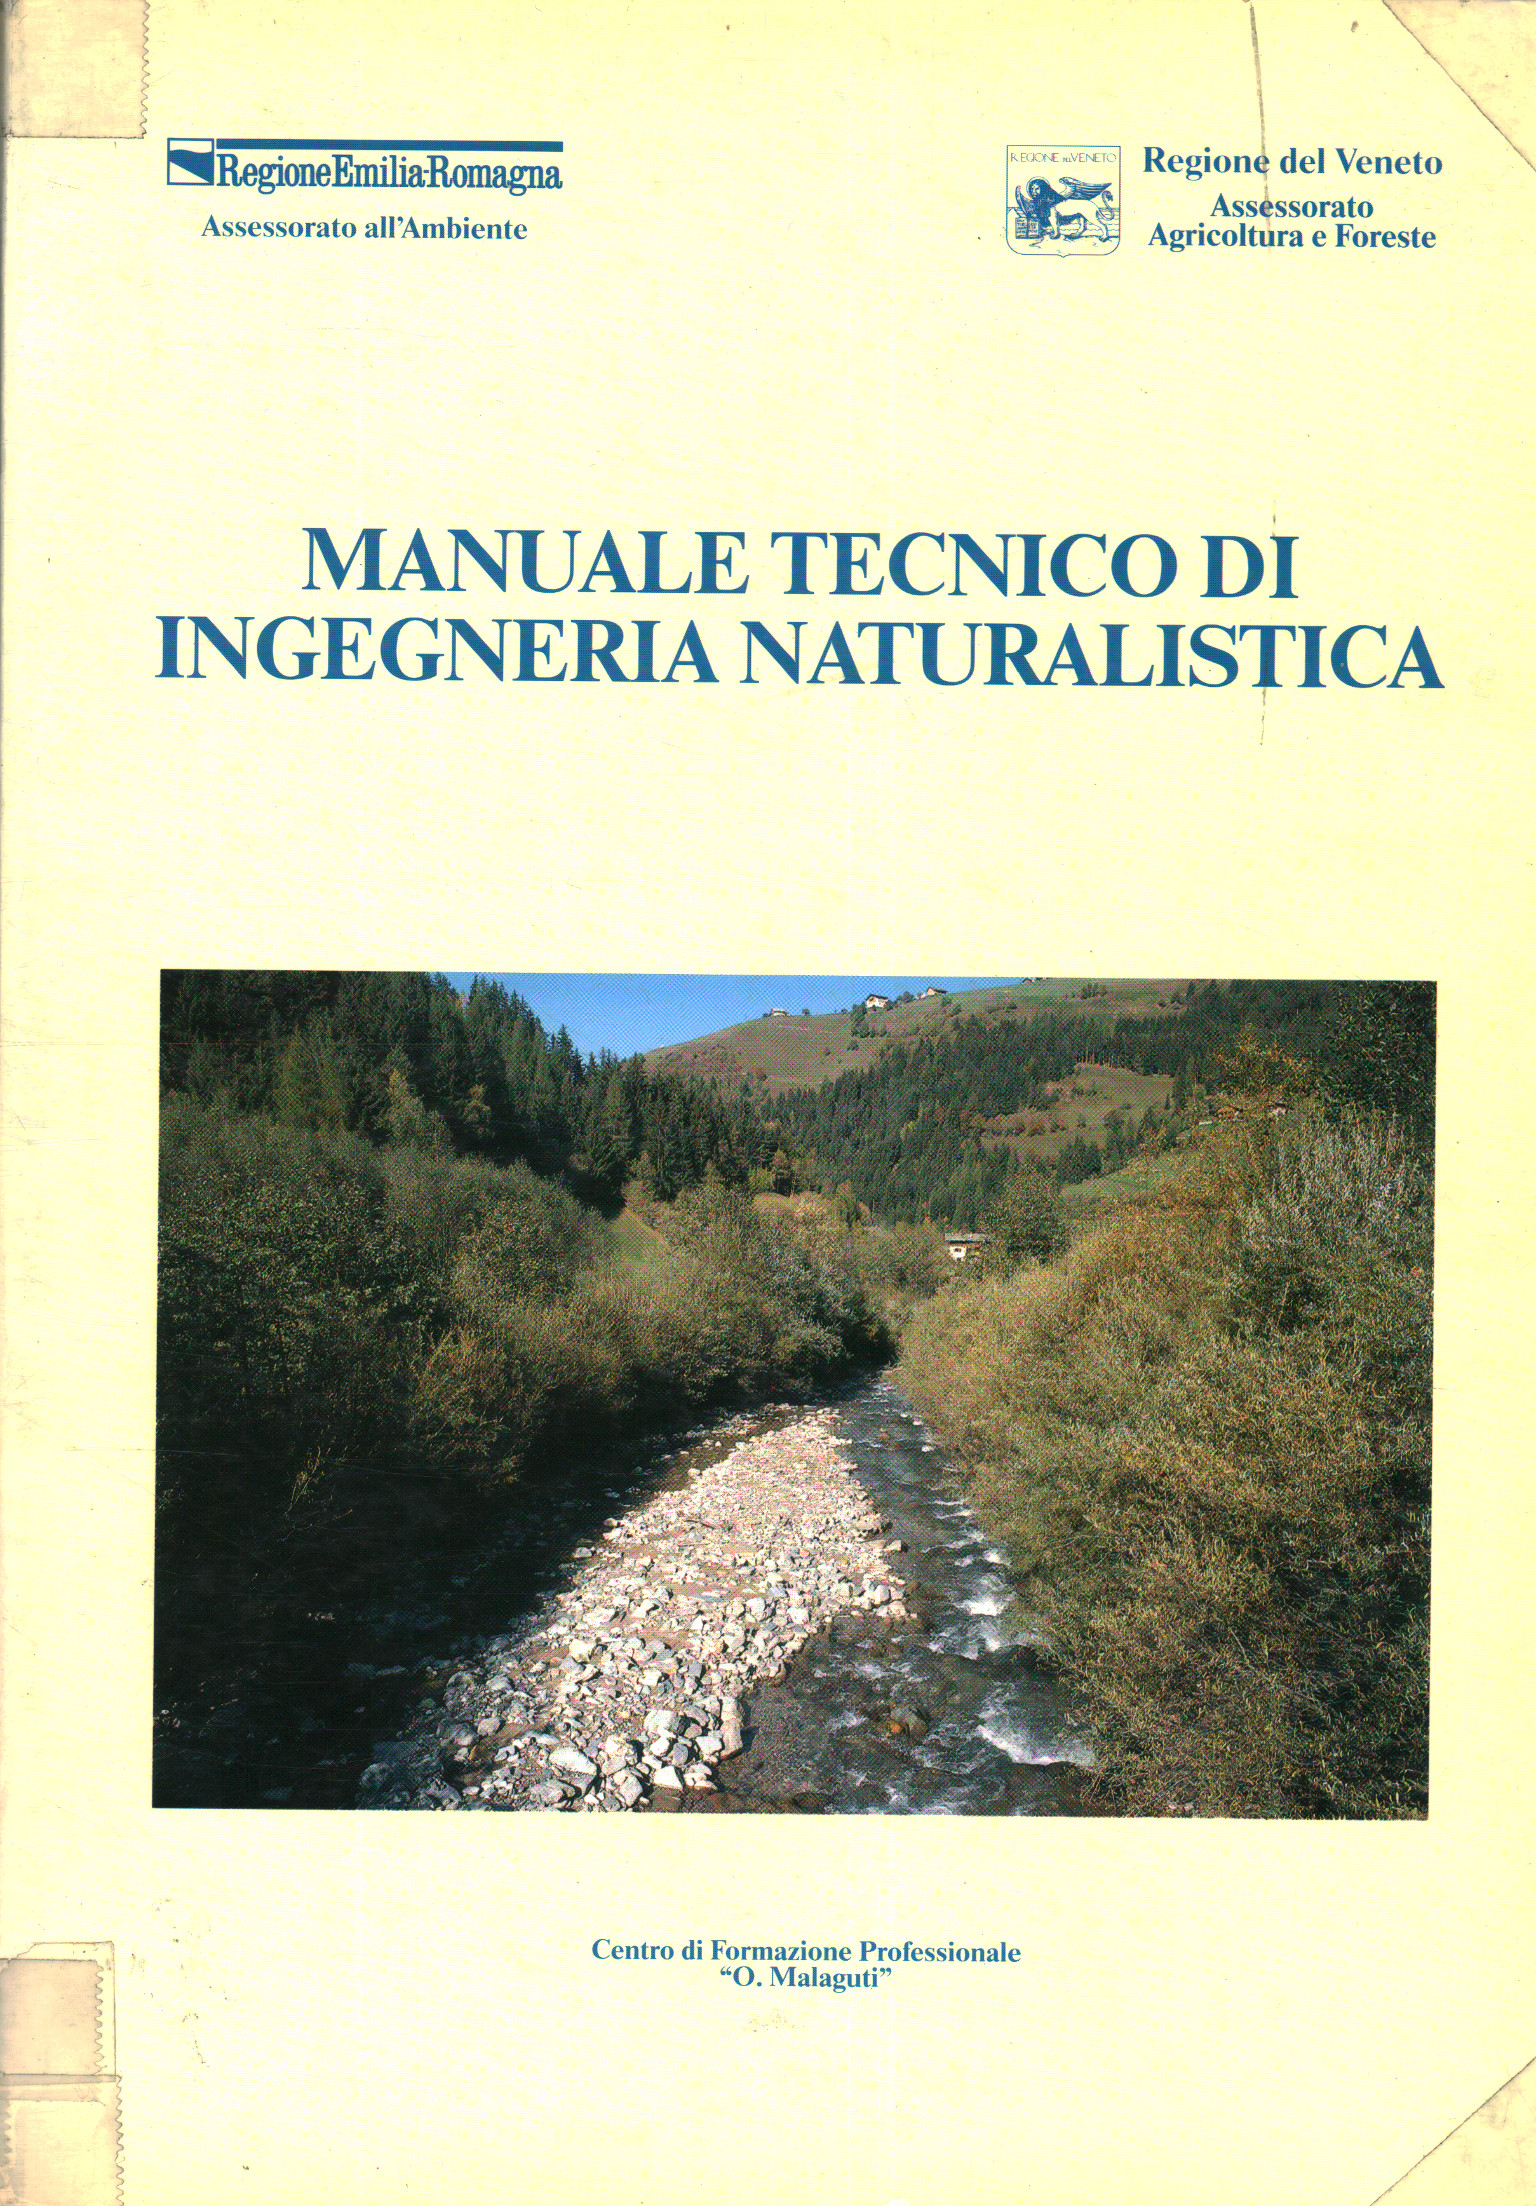 Technical manual of naturalistic engineering, AA.VV.